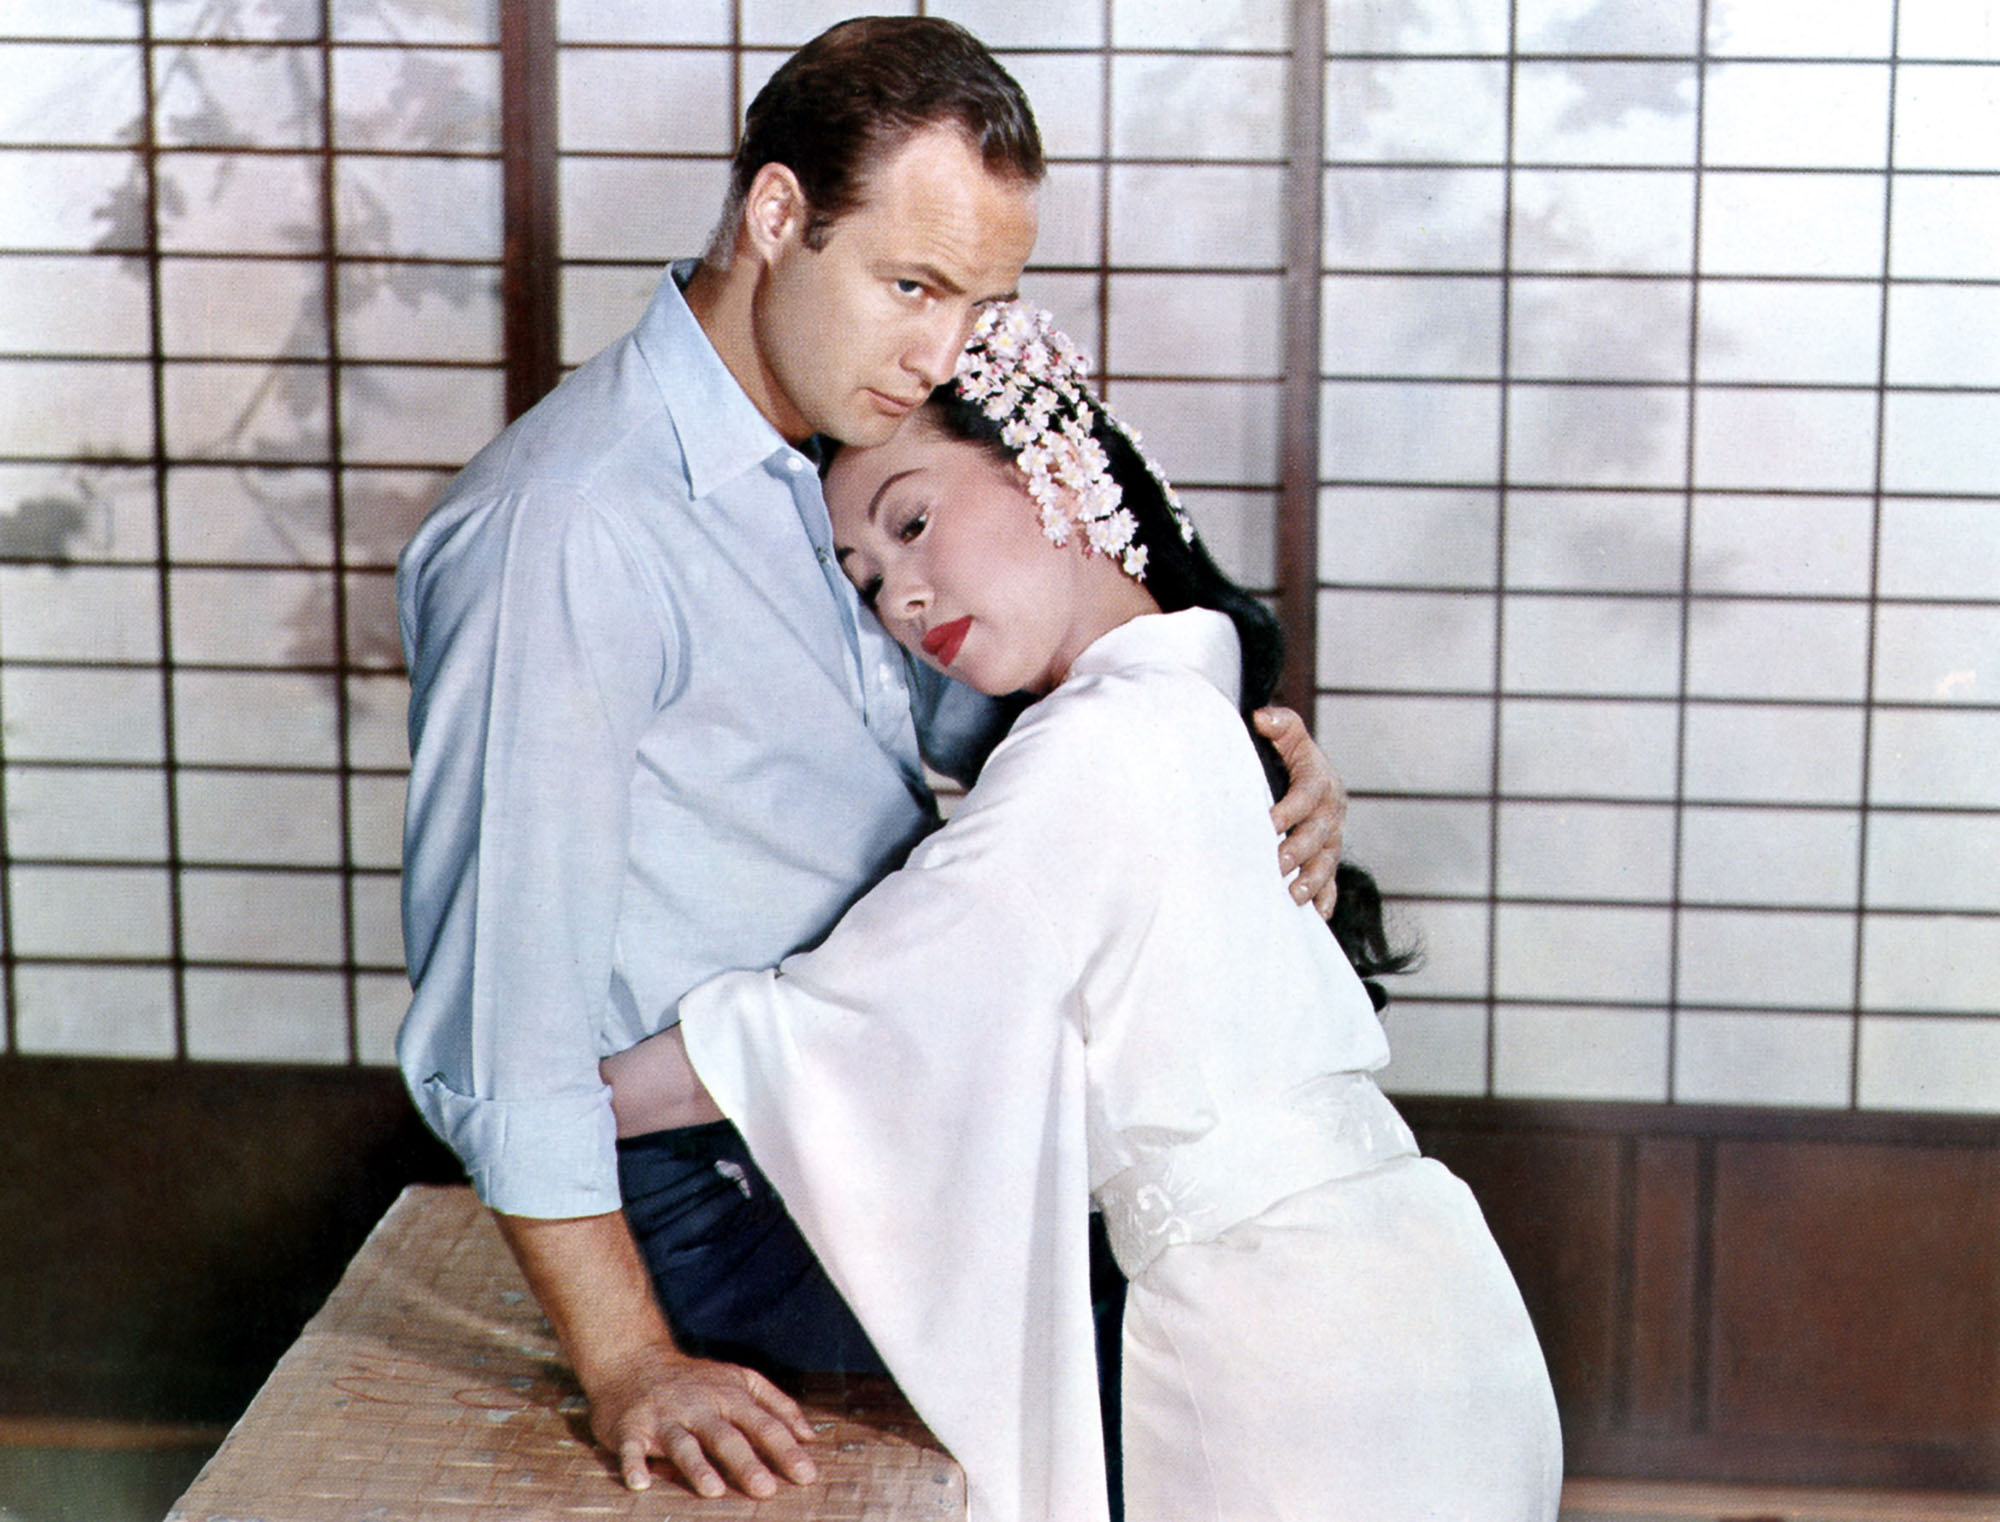 image from the 1957 movie "Sayonara." Marlon Brando's character is on the left, seated in a traditional Japanese room. He is embracing Miiko Taka's character, on the left; she is also seated, wearing a white robe and is returning the embrace. 